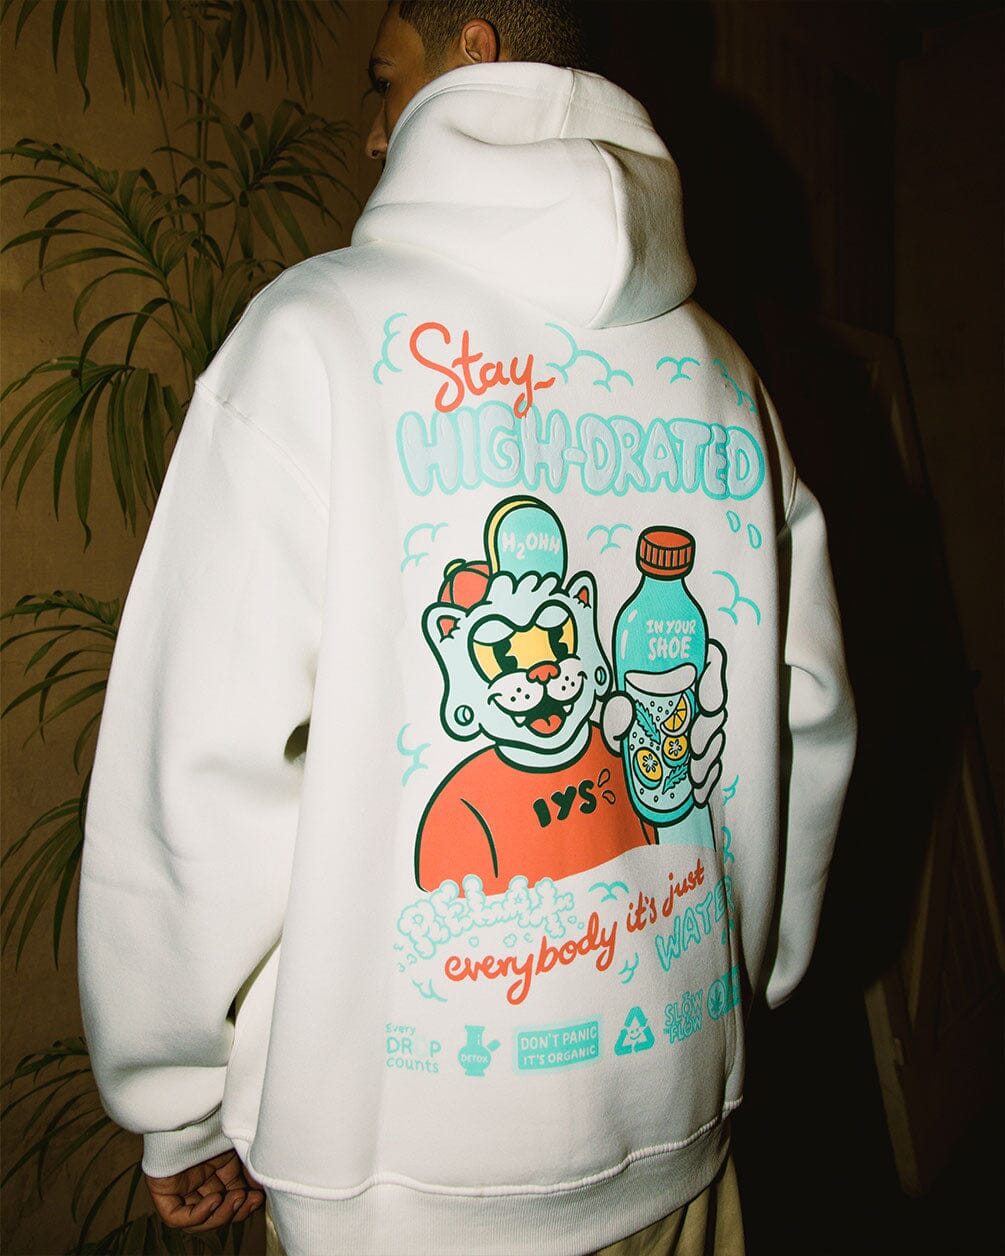 Stay Highdrated Hoodie Statement Hoodies IN YOUR SHOE L 